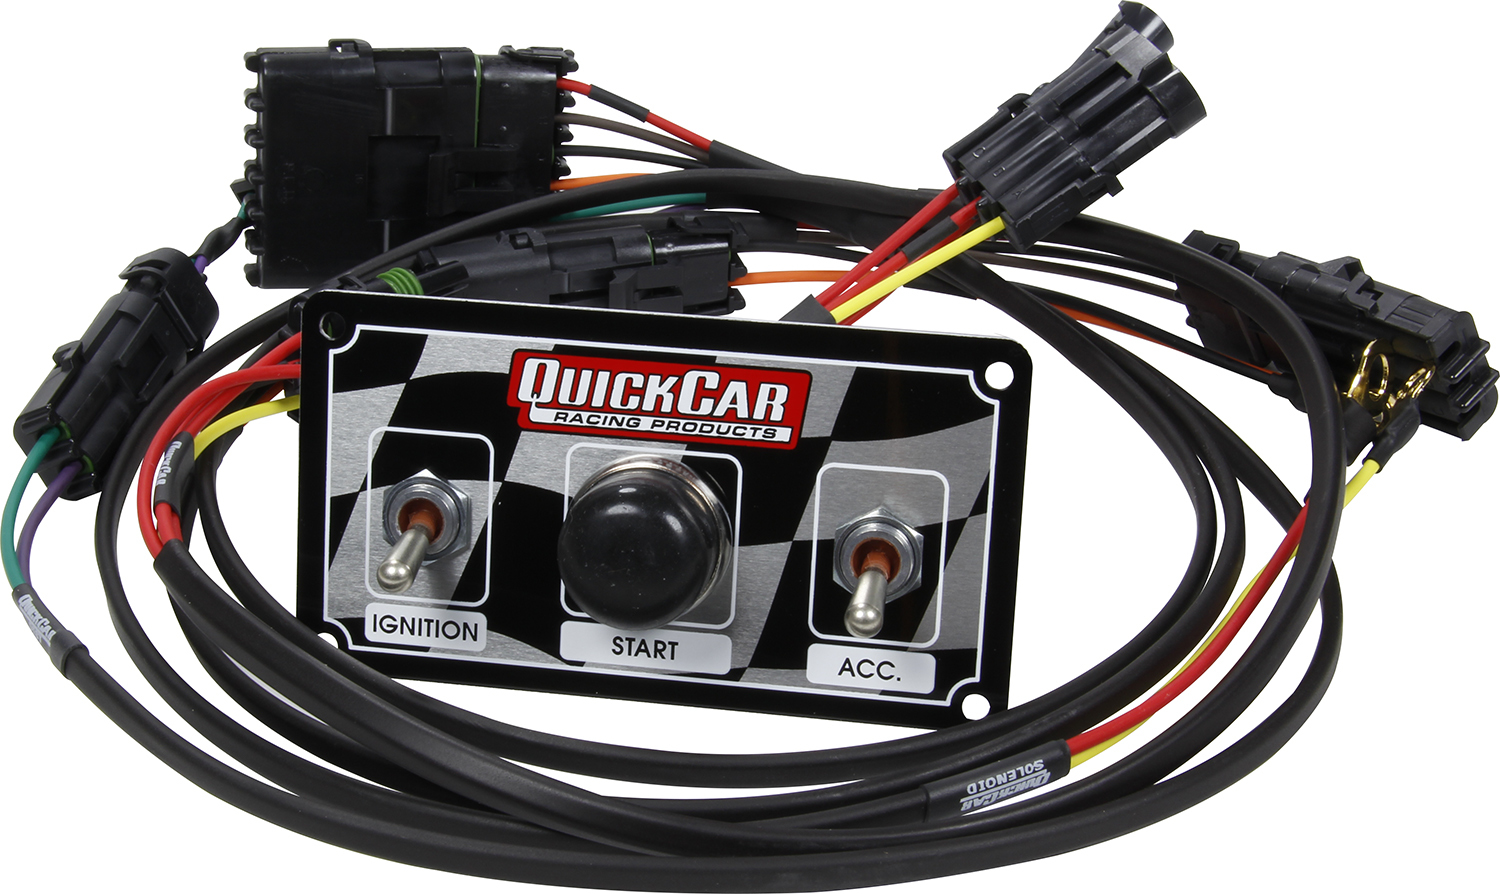 QuickCar 50-2030 Ignition Wiring Harness, Weatherpack Style, Switch Panel Included, 2 Toggles / 1 Momentary Push Button, UMP / IMCA Style Modifieds, Kit